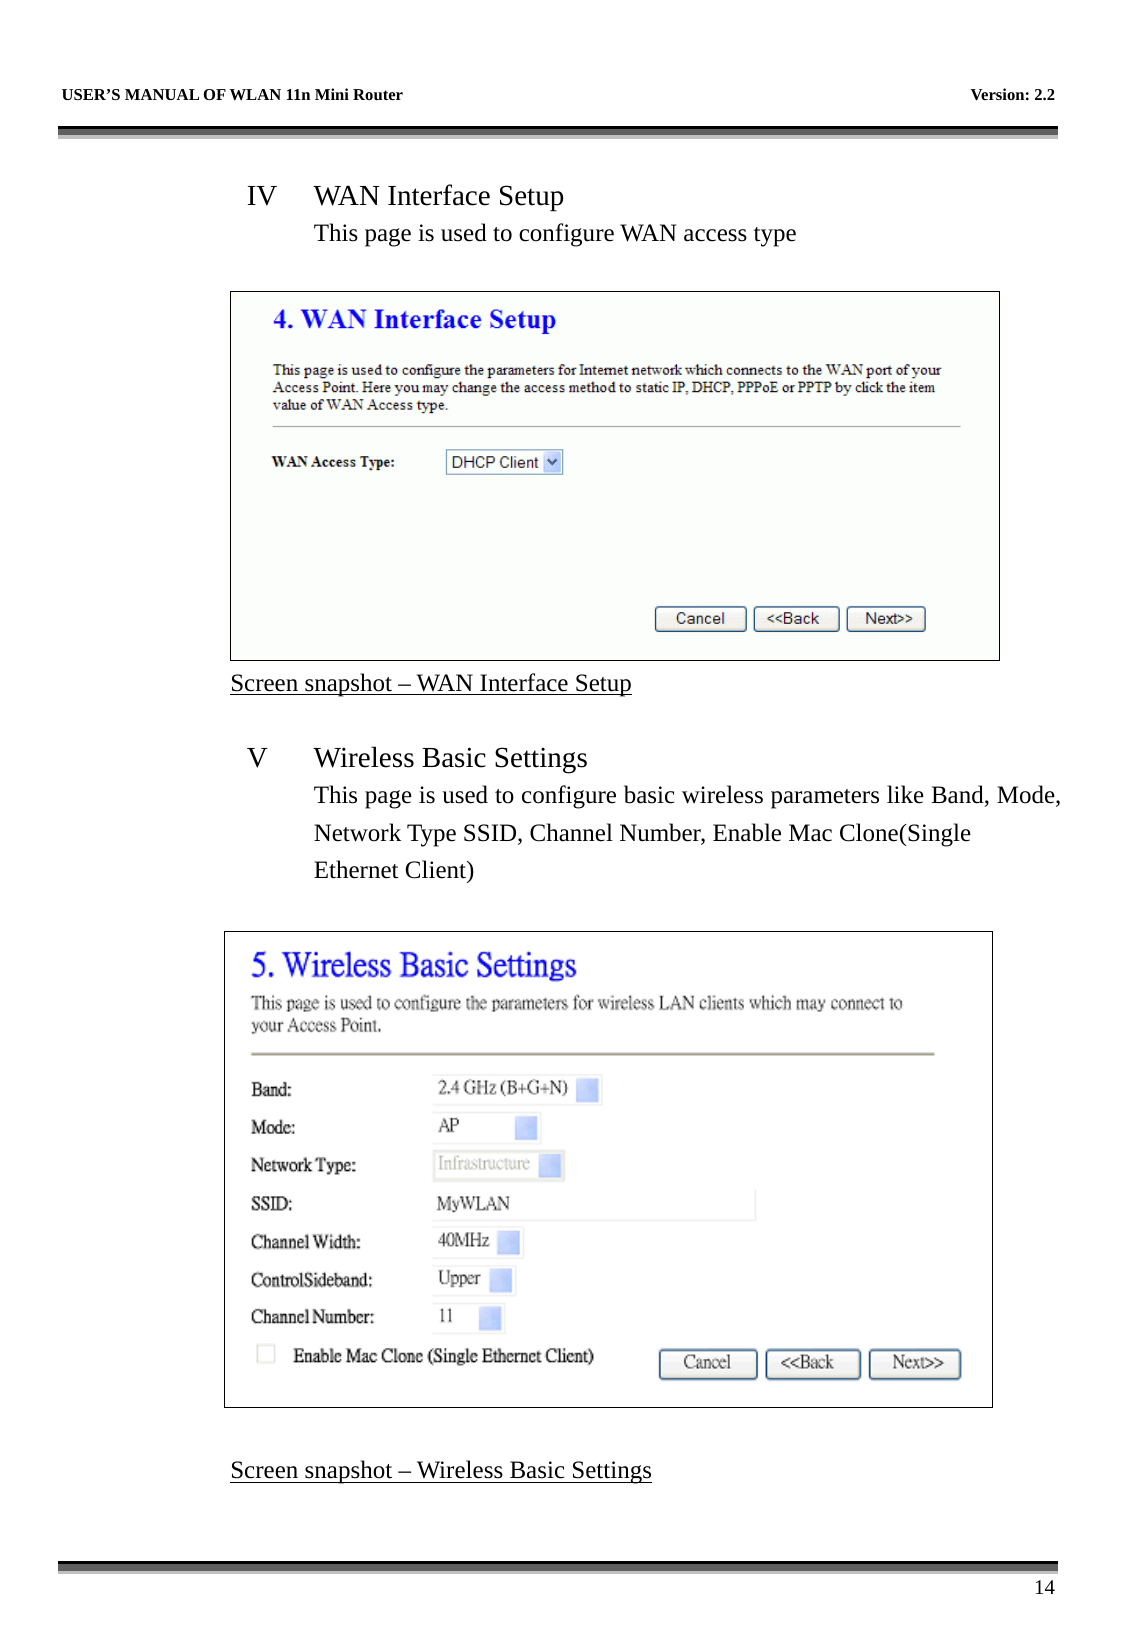   USER’S MANUAL OF WLAN 11n Mini Router    Version: 2.2      14  IV  WAN Interface Setup This page is used to configure WAN access type   Screen snapshot – WAN Interface Setup  V  Wireless Basic Settings This page is used to configure basic wireless parameters like Band, Mode, Network Type SSID, Channel Number, Enable Mac Clone(Single Ethernet Client)                                Screen snapshot – Wireless Basic Settings 